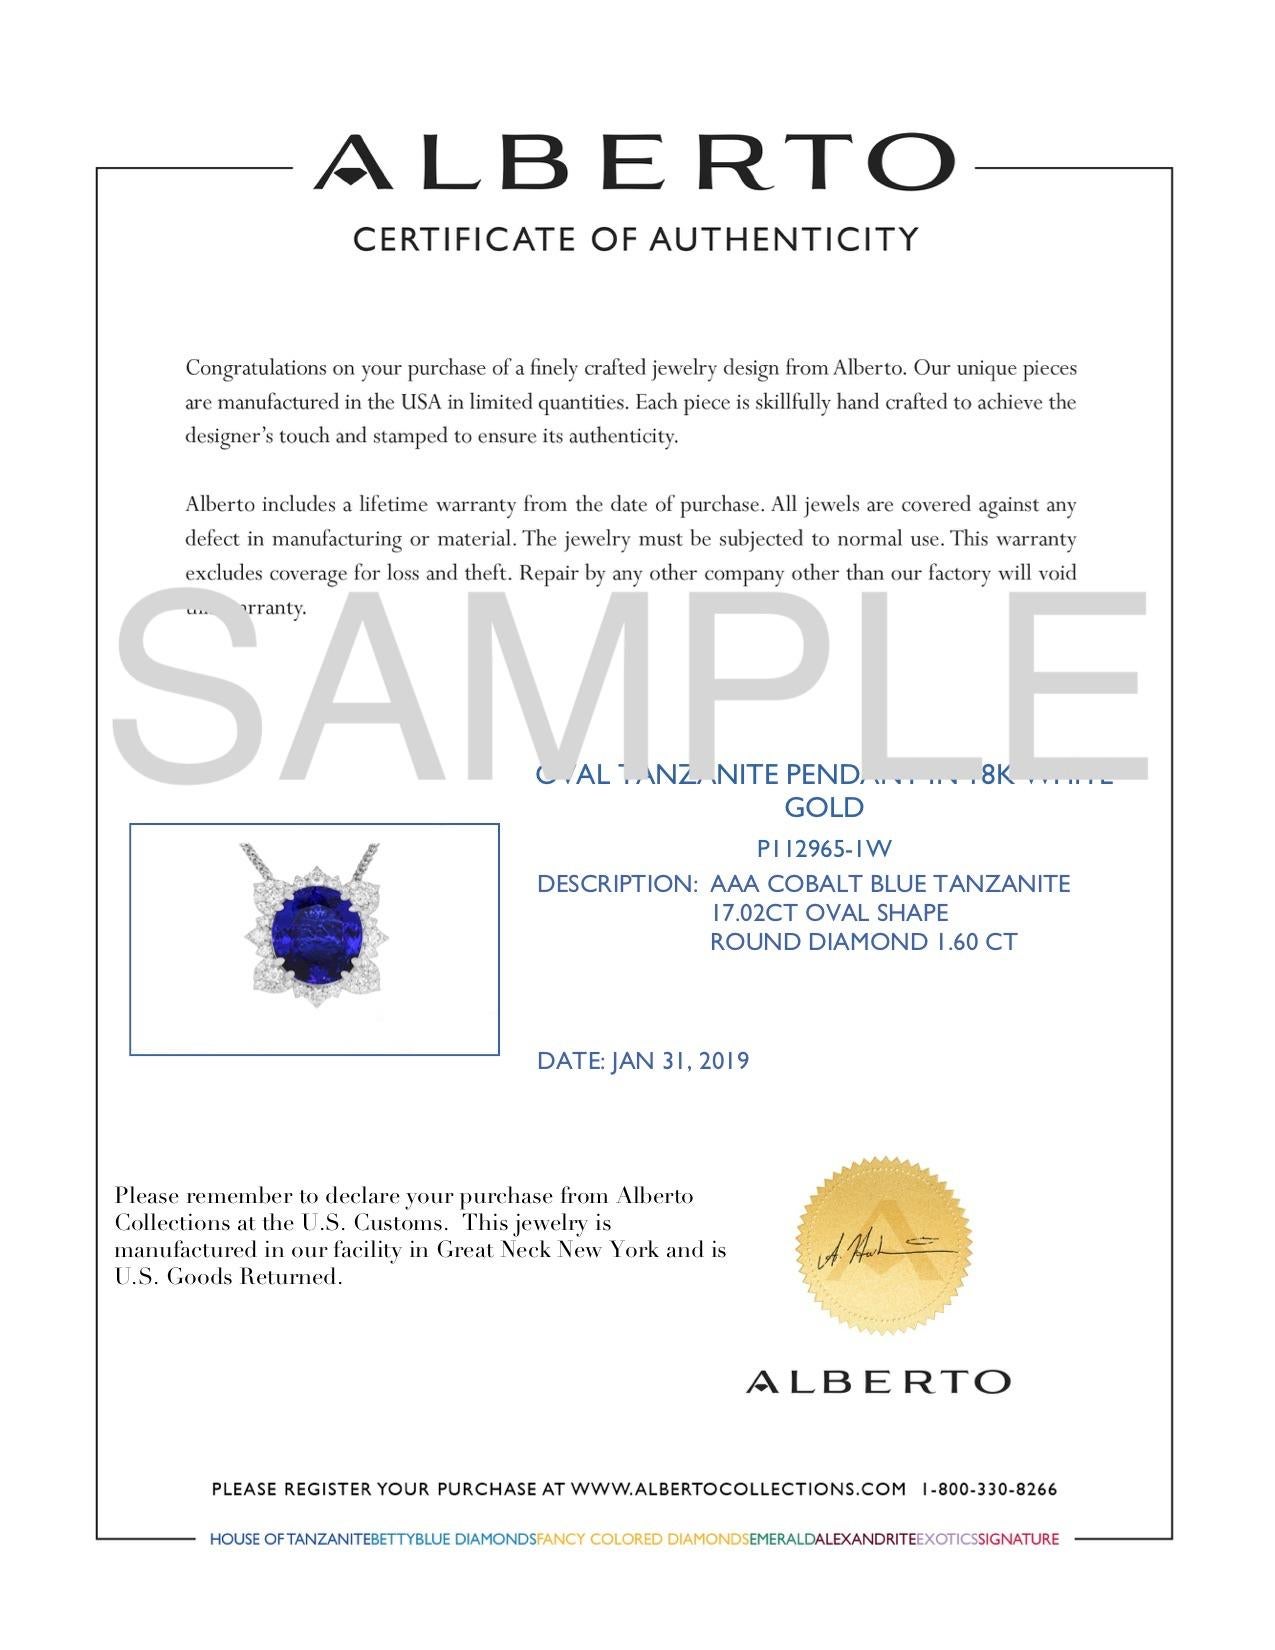 Oval Cut 17.02 Carat Oval Shaped AAA Tanzanite and White Diamond Flower Pendant 18K Gold For Sale